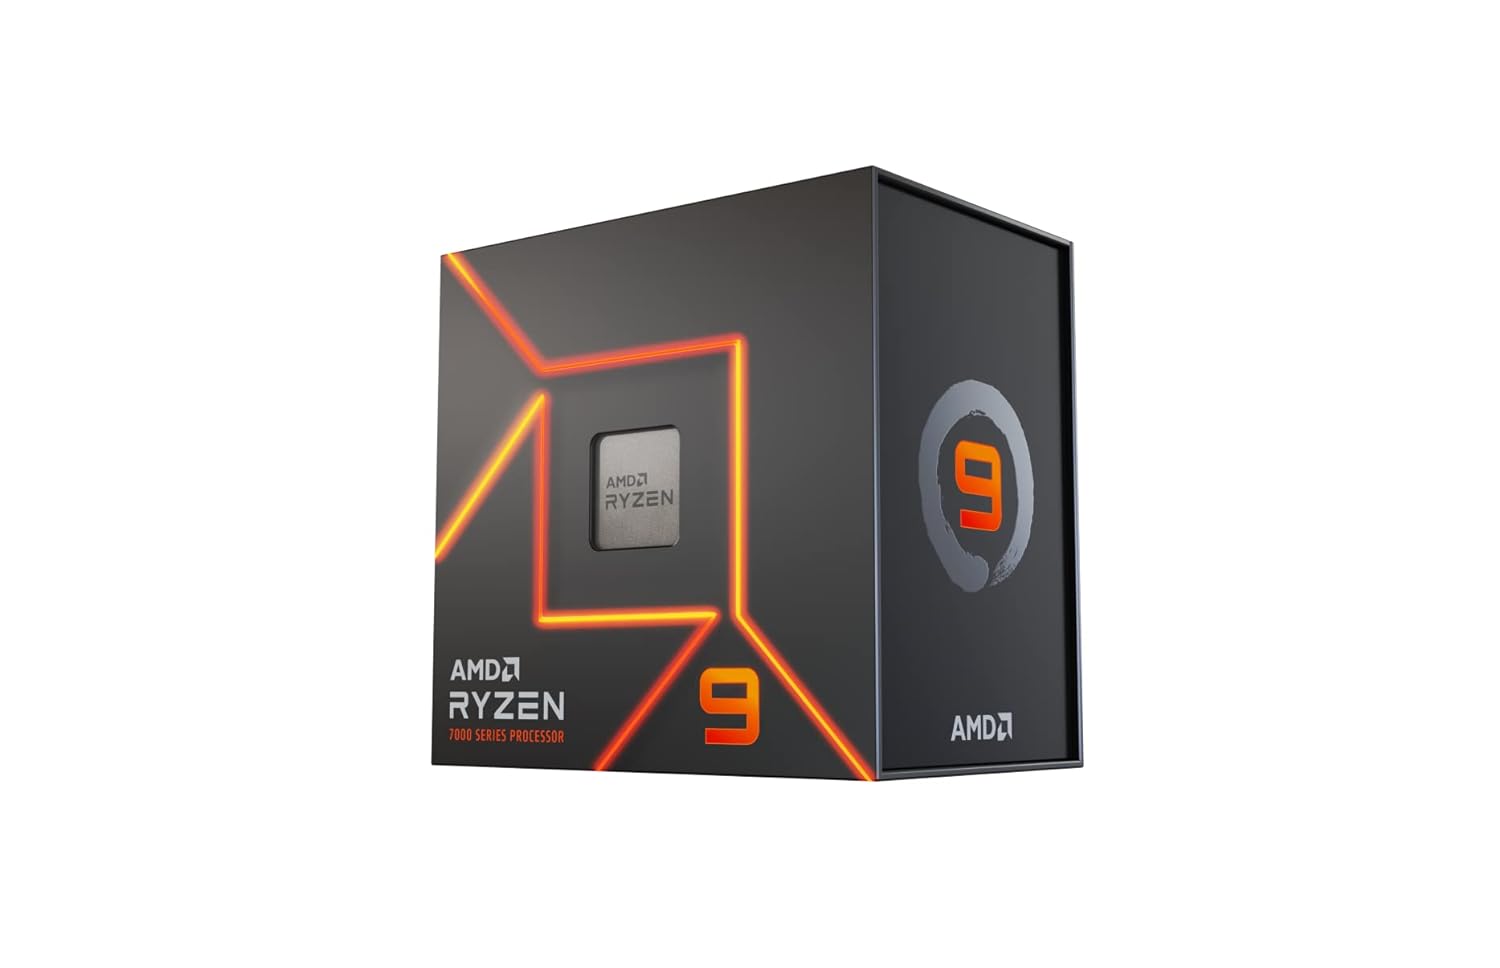 AMD Ryzen 9 7900X Processor With Radeon Graphics | 5.6GHz Boost Clock, AM5 Socket, 12 Cores 24 Threads, 64MB Cache, 170W TDP, Unlocked for Overclocking | Global Availability Desktop CPUs